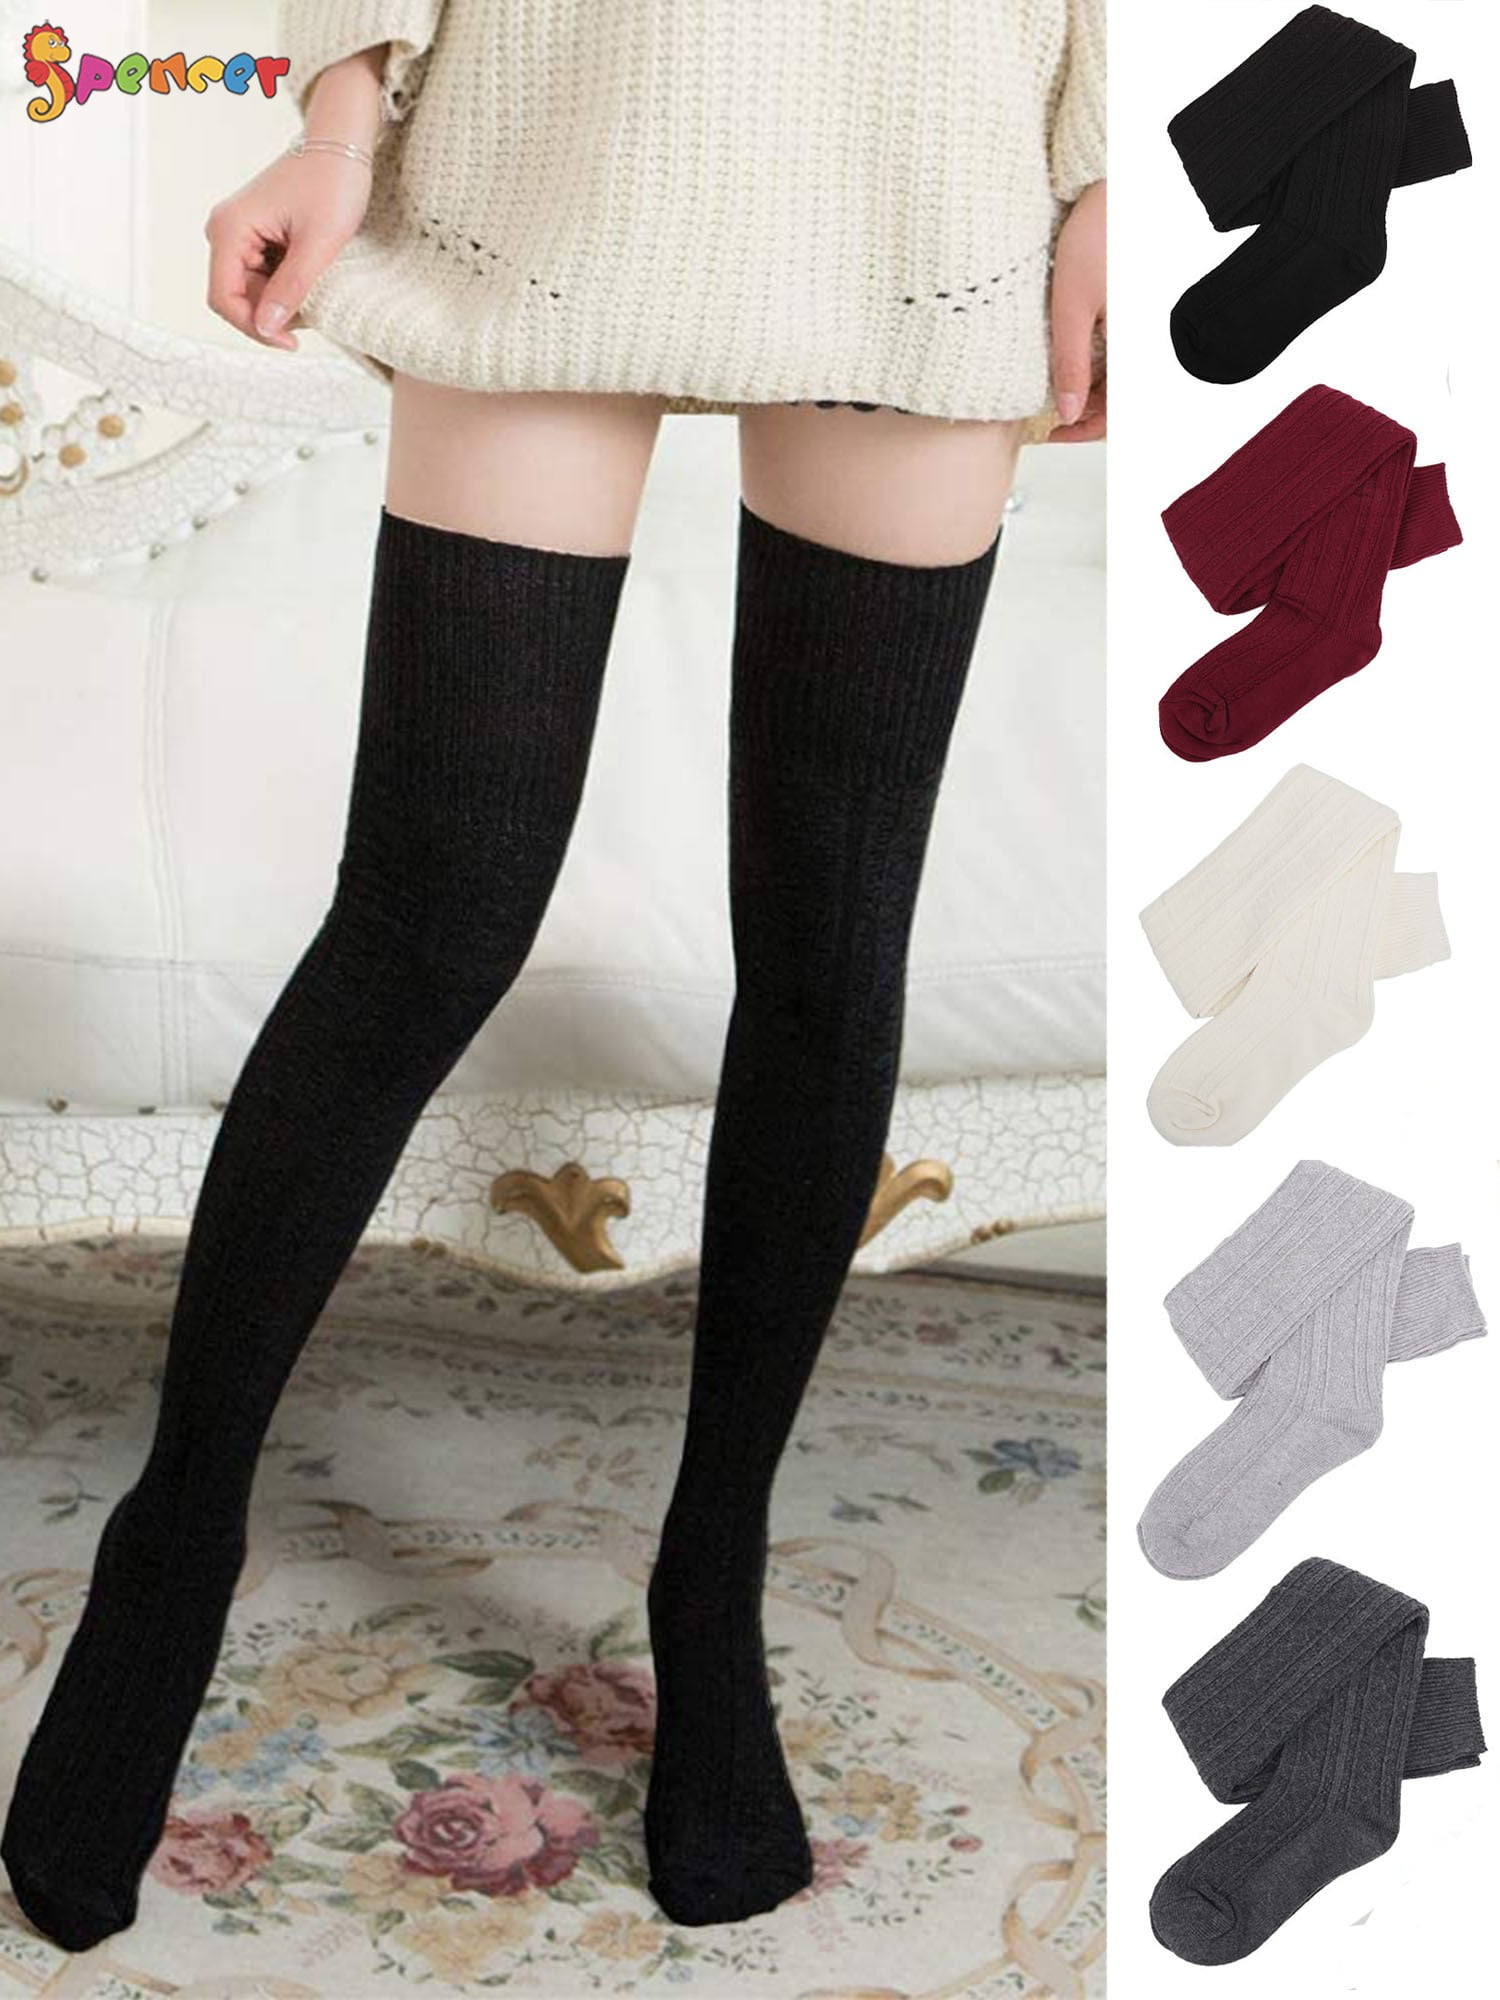 Women Winter Warm Knit Over Knee Thigh High Stockings Socks Pantyhose Tights 